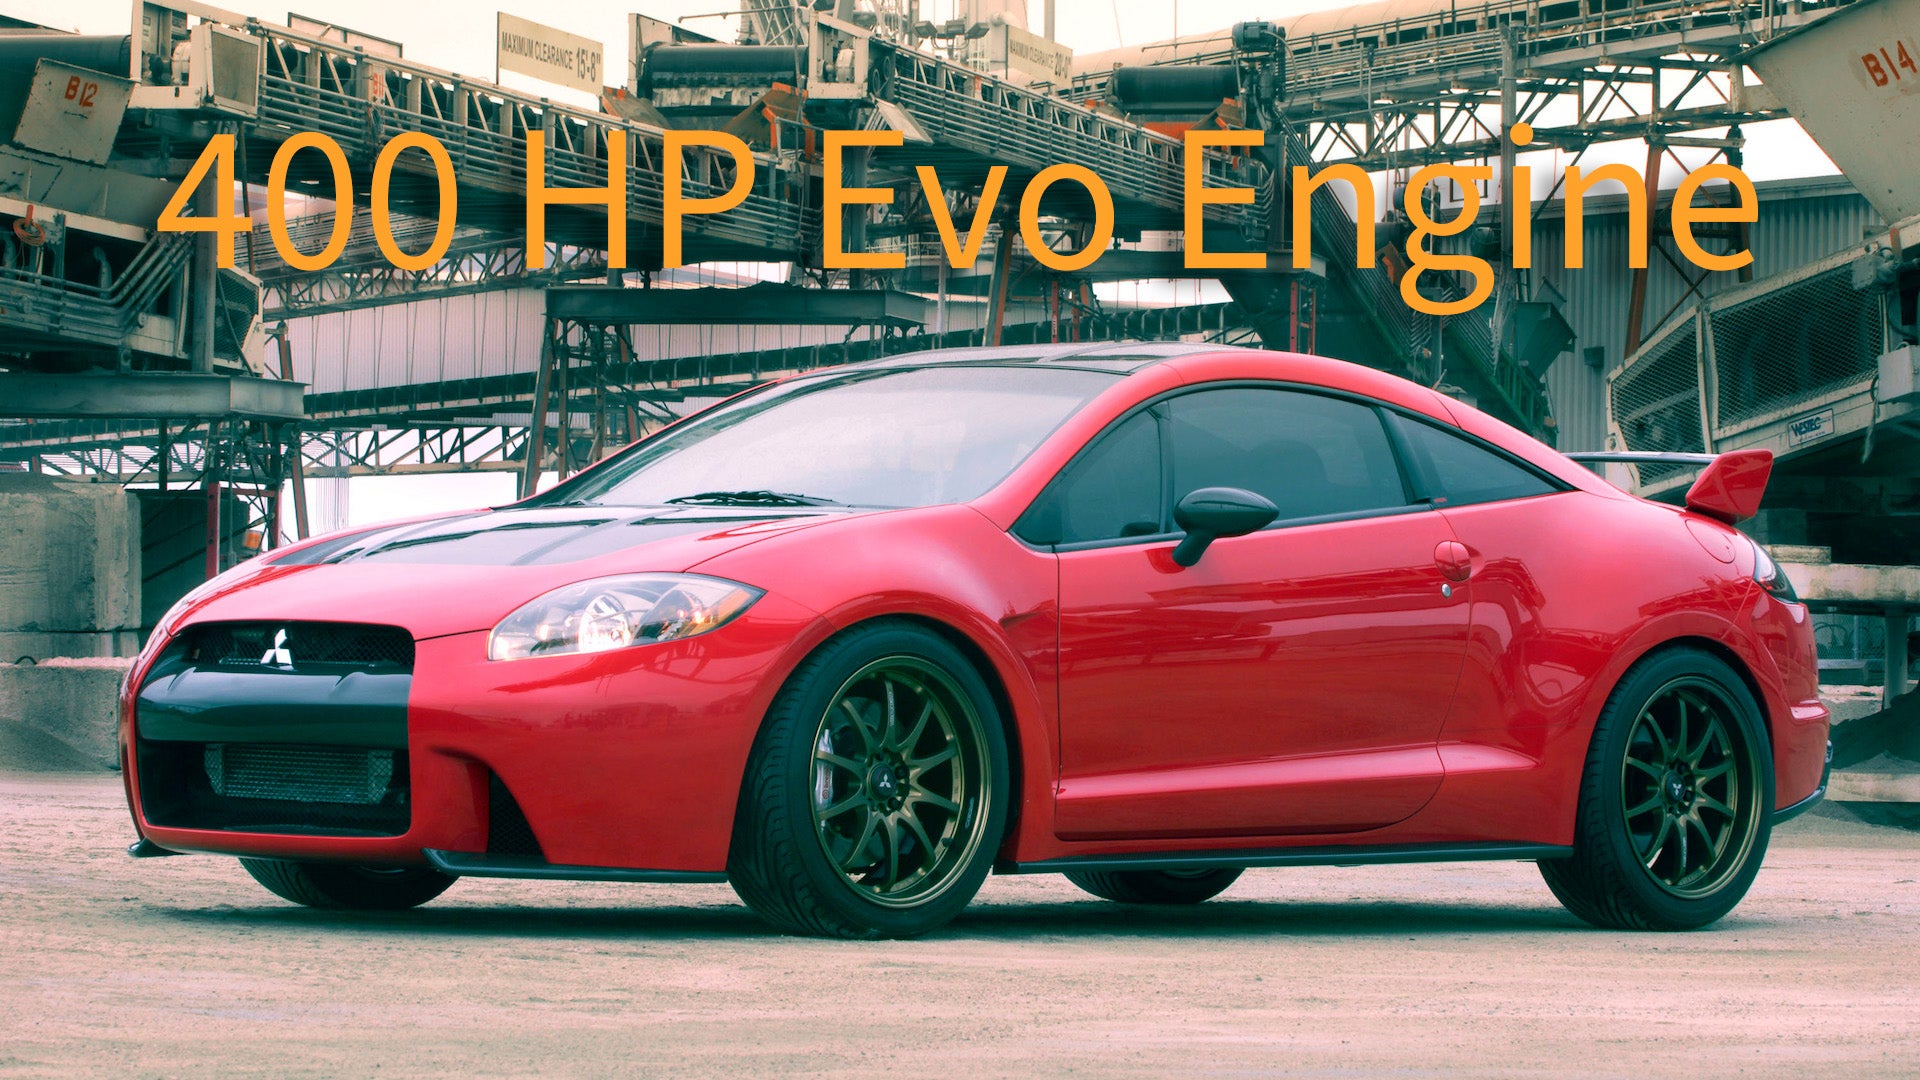 The Mitsubishi Eclipse Ralliart, a high-performance coupe with a 400-horsepower Evo engine, was unfortunately not released to the market.